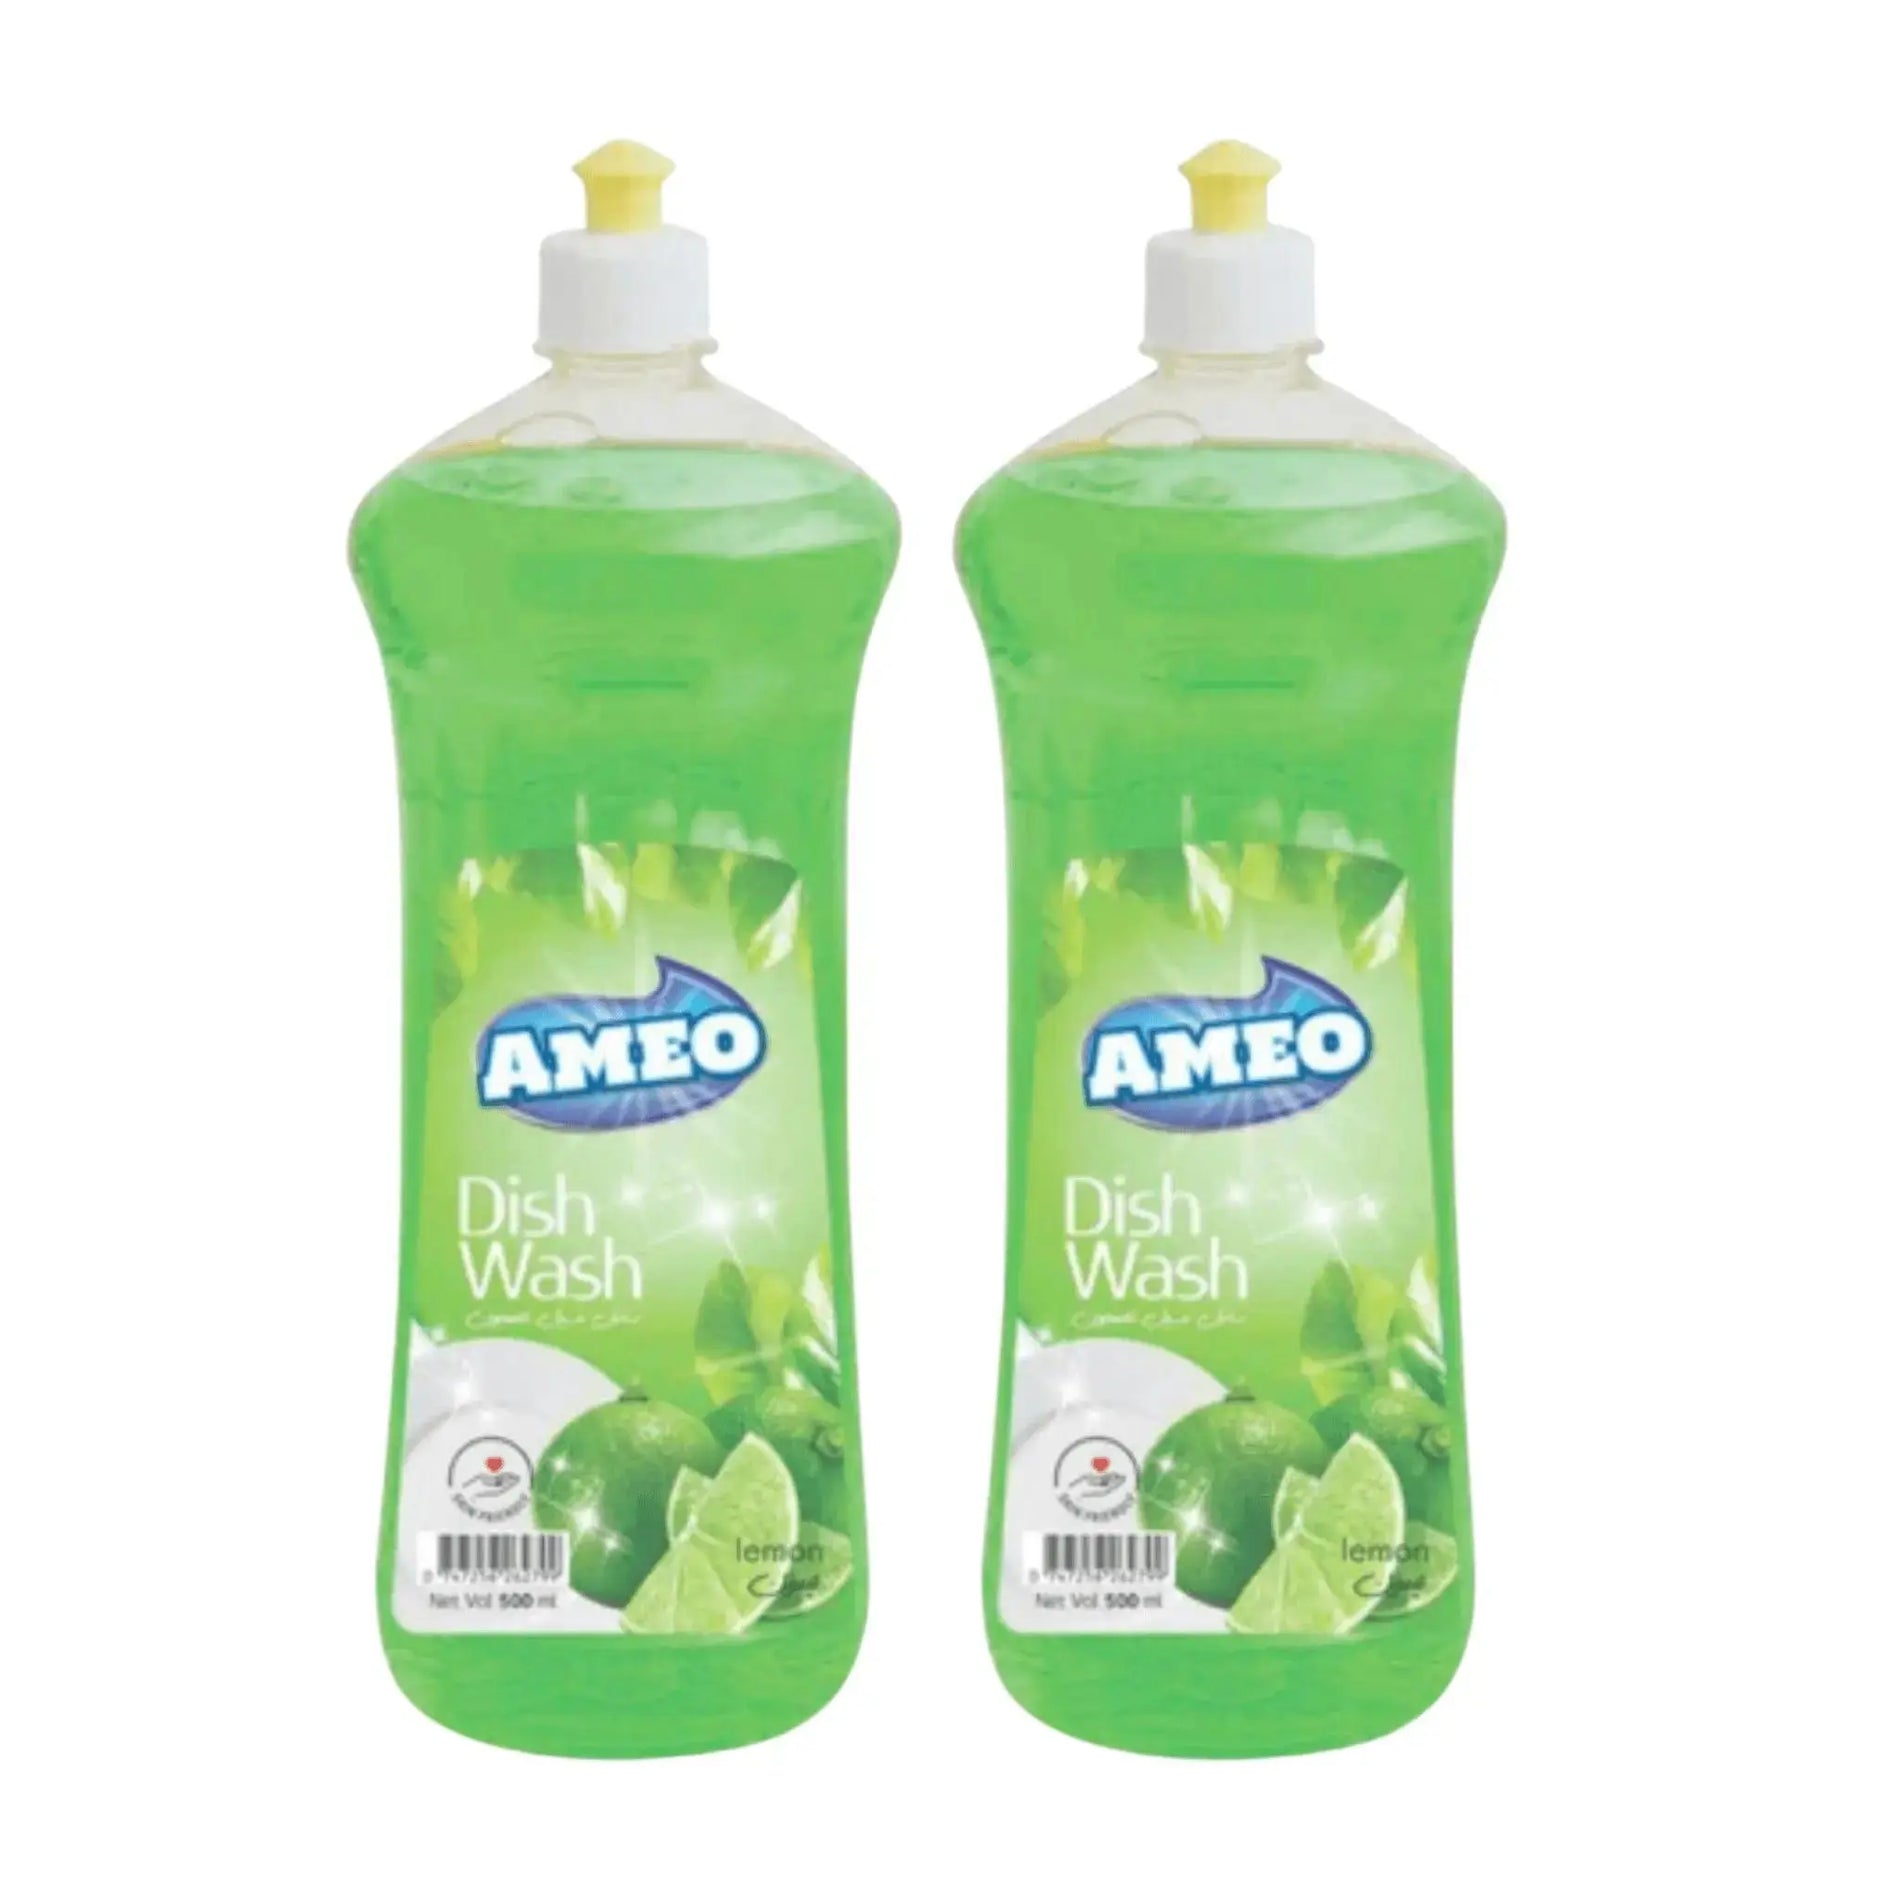 Discover-the-Power-of-Ameo-Dish-Wash-Green-Lemon-A-12-Pack-Essential-for-Sparkling-Clean-Dishes Marino.AE